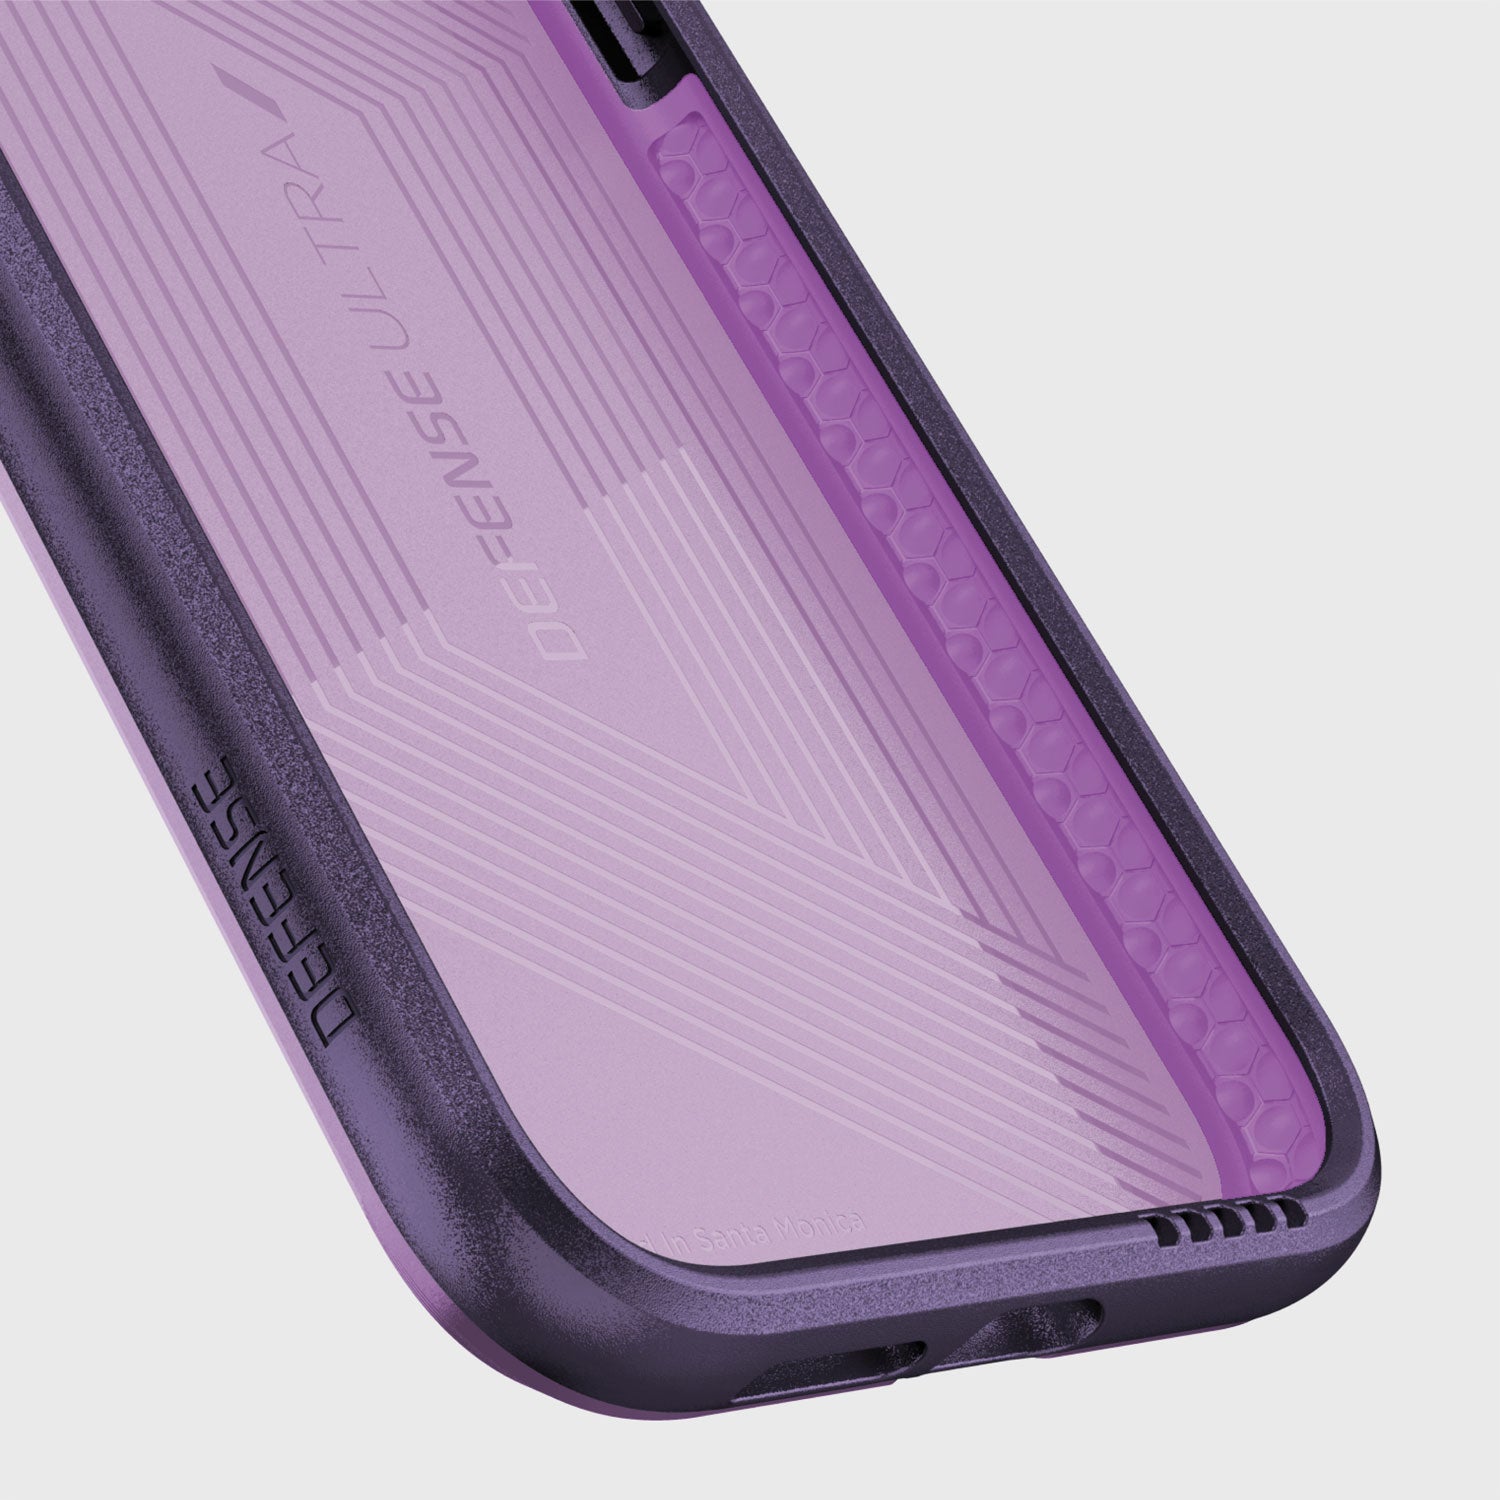 The back view of an ULTRA case in purple, providing device protection with the Raptic Ultra case.